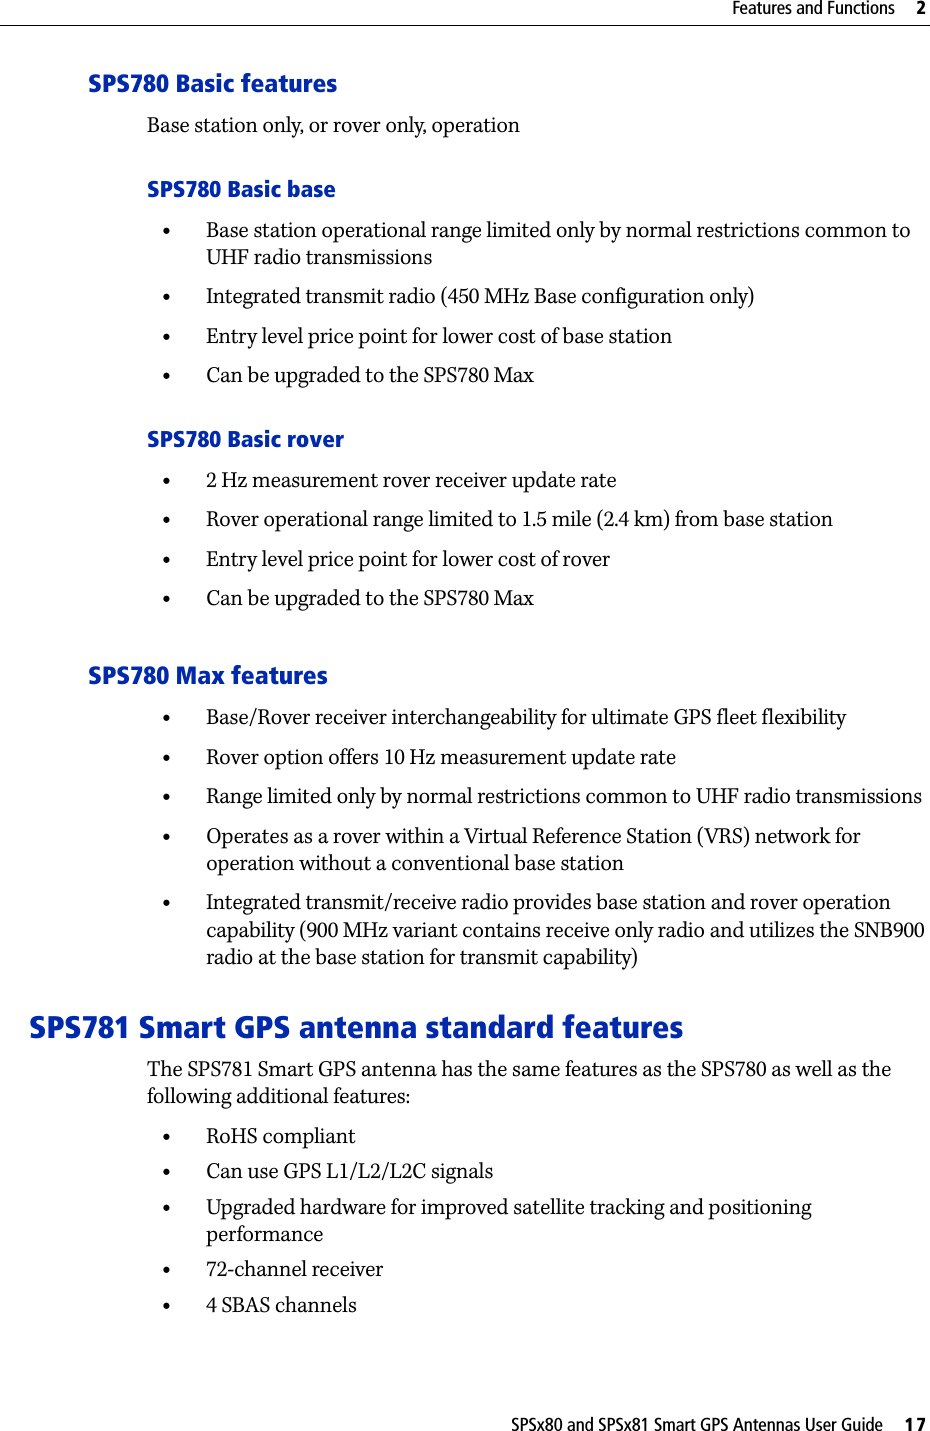 SPSx80 and SPSx81 Smart GPS Antennas User Guide     17Features and Functions     2SPS780 Basic featuresBase station only, or rover only, operationSPS780 Basic base•Base station operational range limited only by normal restrictions common to UHF radio transmissions•Integrated transmit radio (450 MHz Base configuration only)•Entry level price point for lower cost of base station•Can be upgraded to the SPS780 MaxSPS780 Basic rover•2 Hz measurement rover receiver update rate•Rover operational range limited to 1.5 mile (2.4 km) from base station•Entry level price point for lower cost of rover•Can be upgraded to the SPS780 MaxSPS780 Max features•Base/Rover receiver interchangeability for ultimate GPS fleet flexibility•Rover option offers 10 Hz measurement update rate•Range limited only by normal restrictions common to UHF radio transmissions•Operates as a rover within a Virtual Reference Station (VRS) network for operation without a conventional base station •Integrated transmit/receive radio provides base station and rover operation capability (900 MHz variant contains receive only radio and utilizes the SNB900 radio at the base station for transmit capability) SPS781 Smart GPS antenna standard featuresThe SPS781 Smart GPS antenna has the same features as the SPS780 as well as the following additional features:•RoHS compliant•Can use GPS L1/L2/L2C signals•Upgraded hardware for improved satellite tracking and positioning performance•72-channel receiver •4 SBAS channels